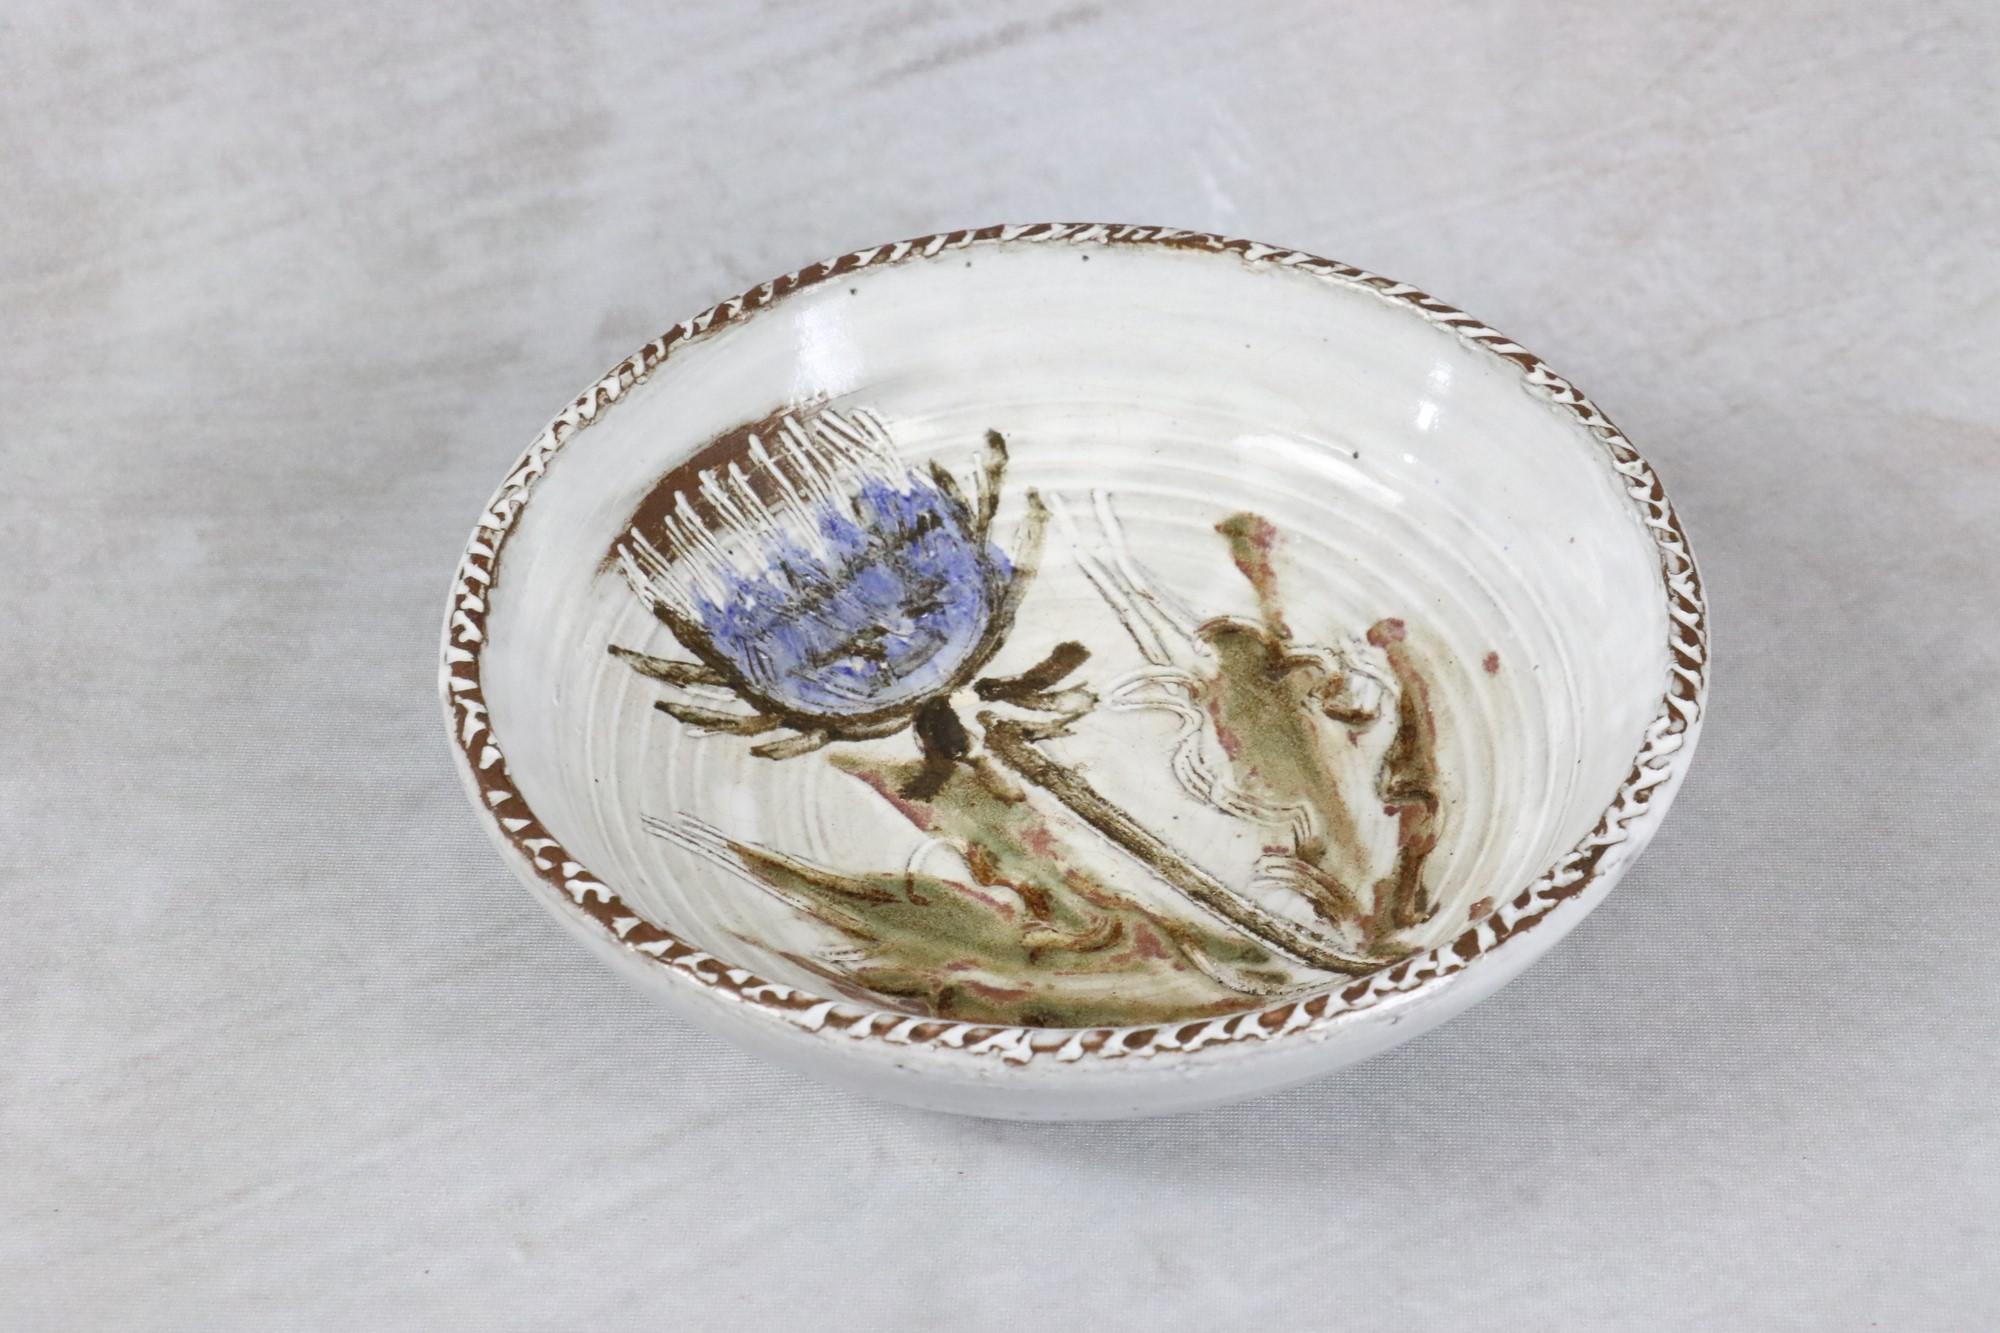 Mid-Century Modern French Ceramic Platter by Albert Thiry, 1960s, era Blin

One beautiful glazed ceramic platter with an engraved and hand-painted blue thistle flower bud.
We find the vocabulary of preference of the ceramist: a chalky white